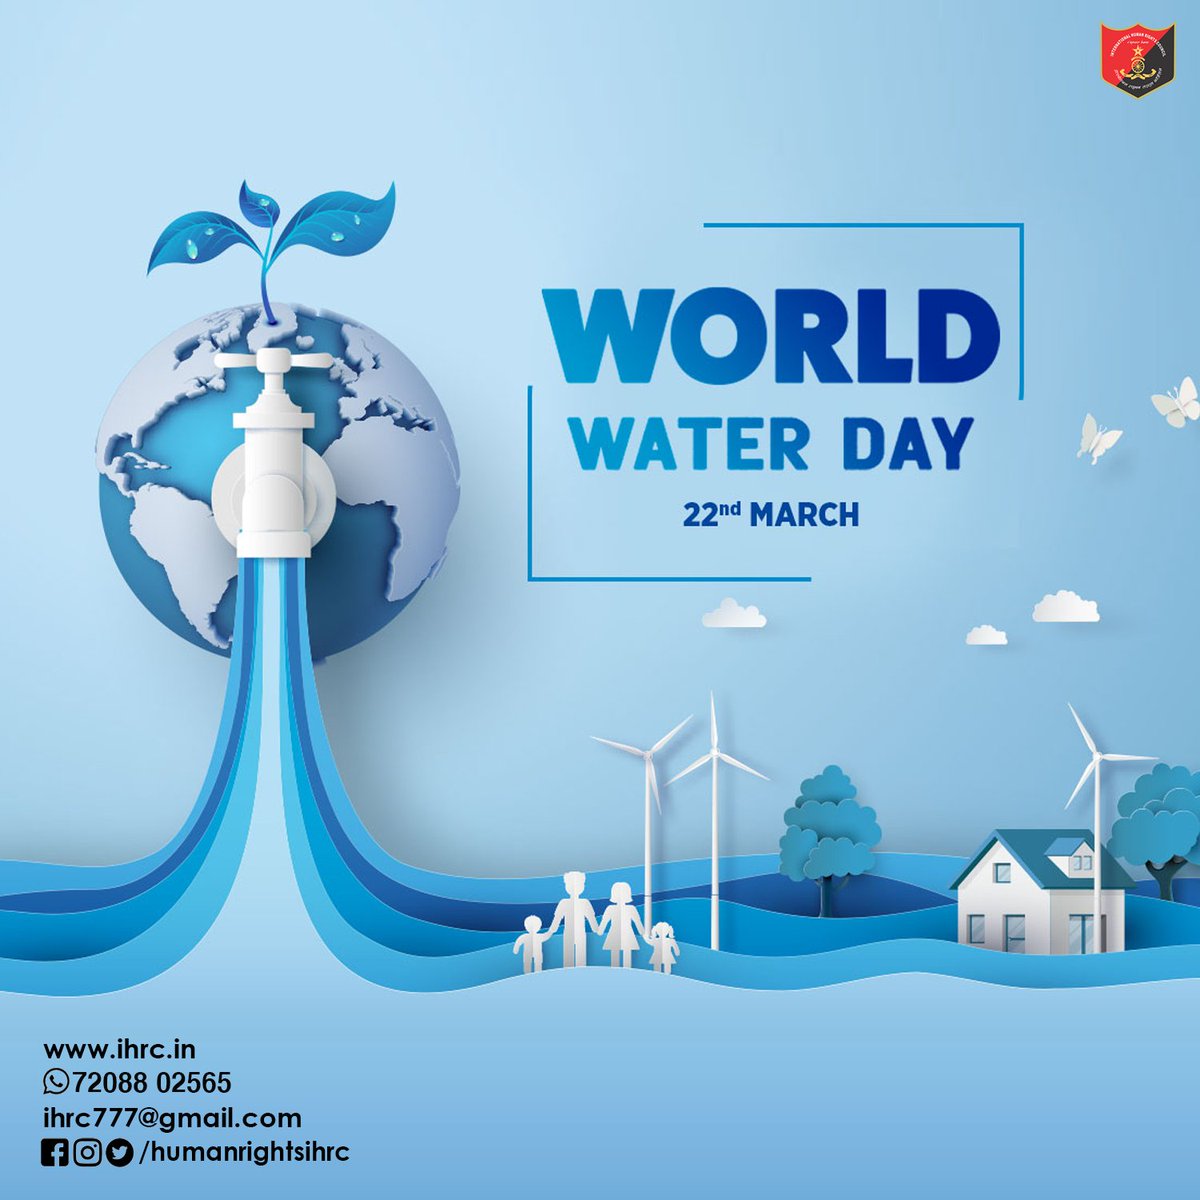 #worldwaterday #water #climatechange #climate #leavingnoonebehind #savewater #worldwaterday #waterday #wwdpc #cleanwater #valuingwater #nature #wastewatertreatment #icareaboutwater #climatechangeequalswater #unwater #drinkingwater #waterislife